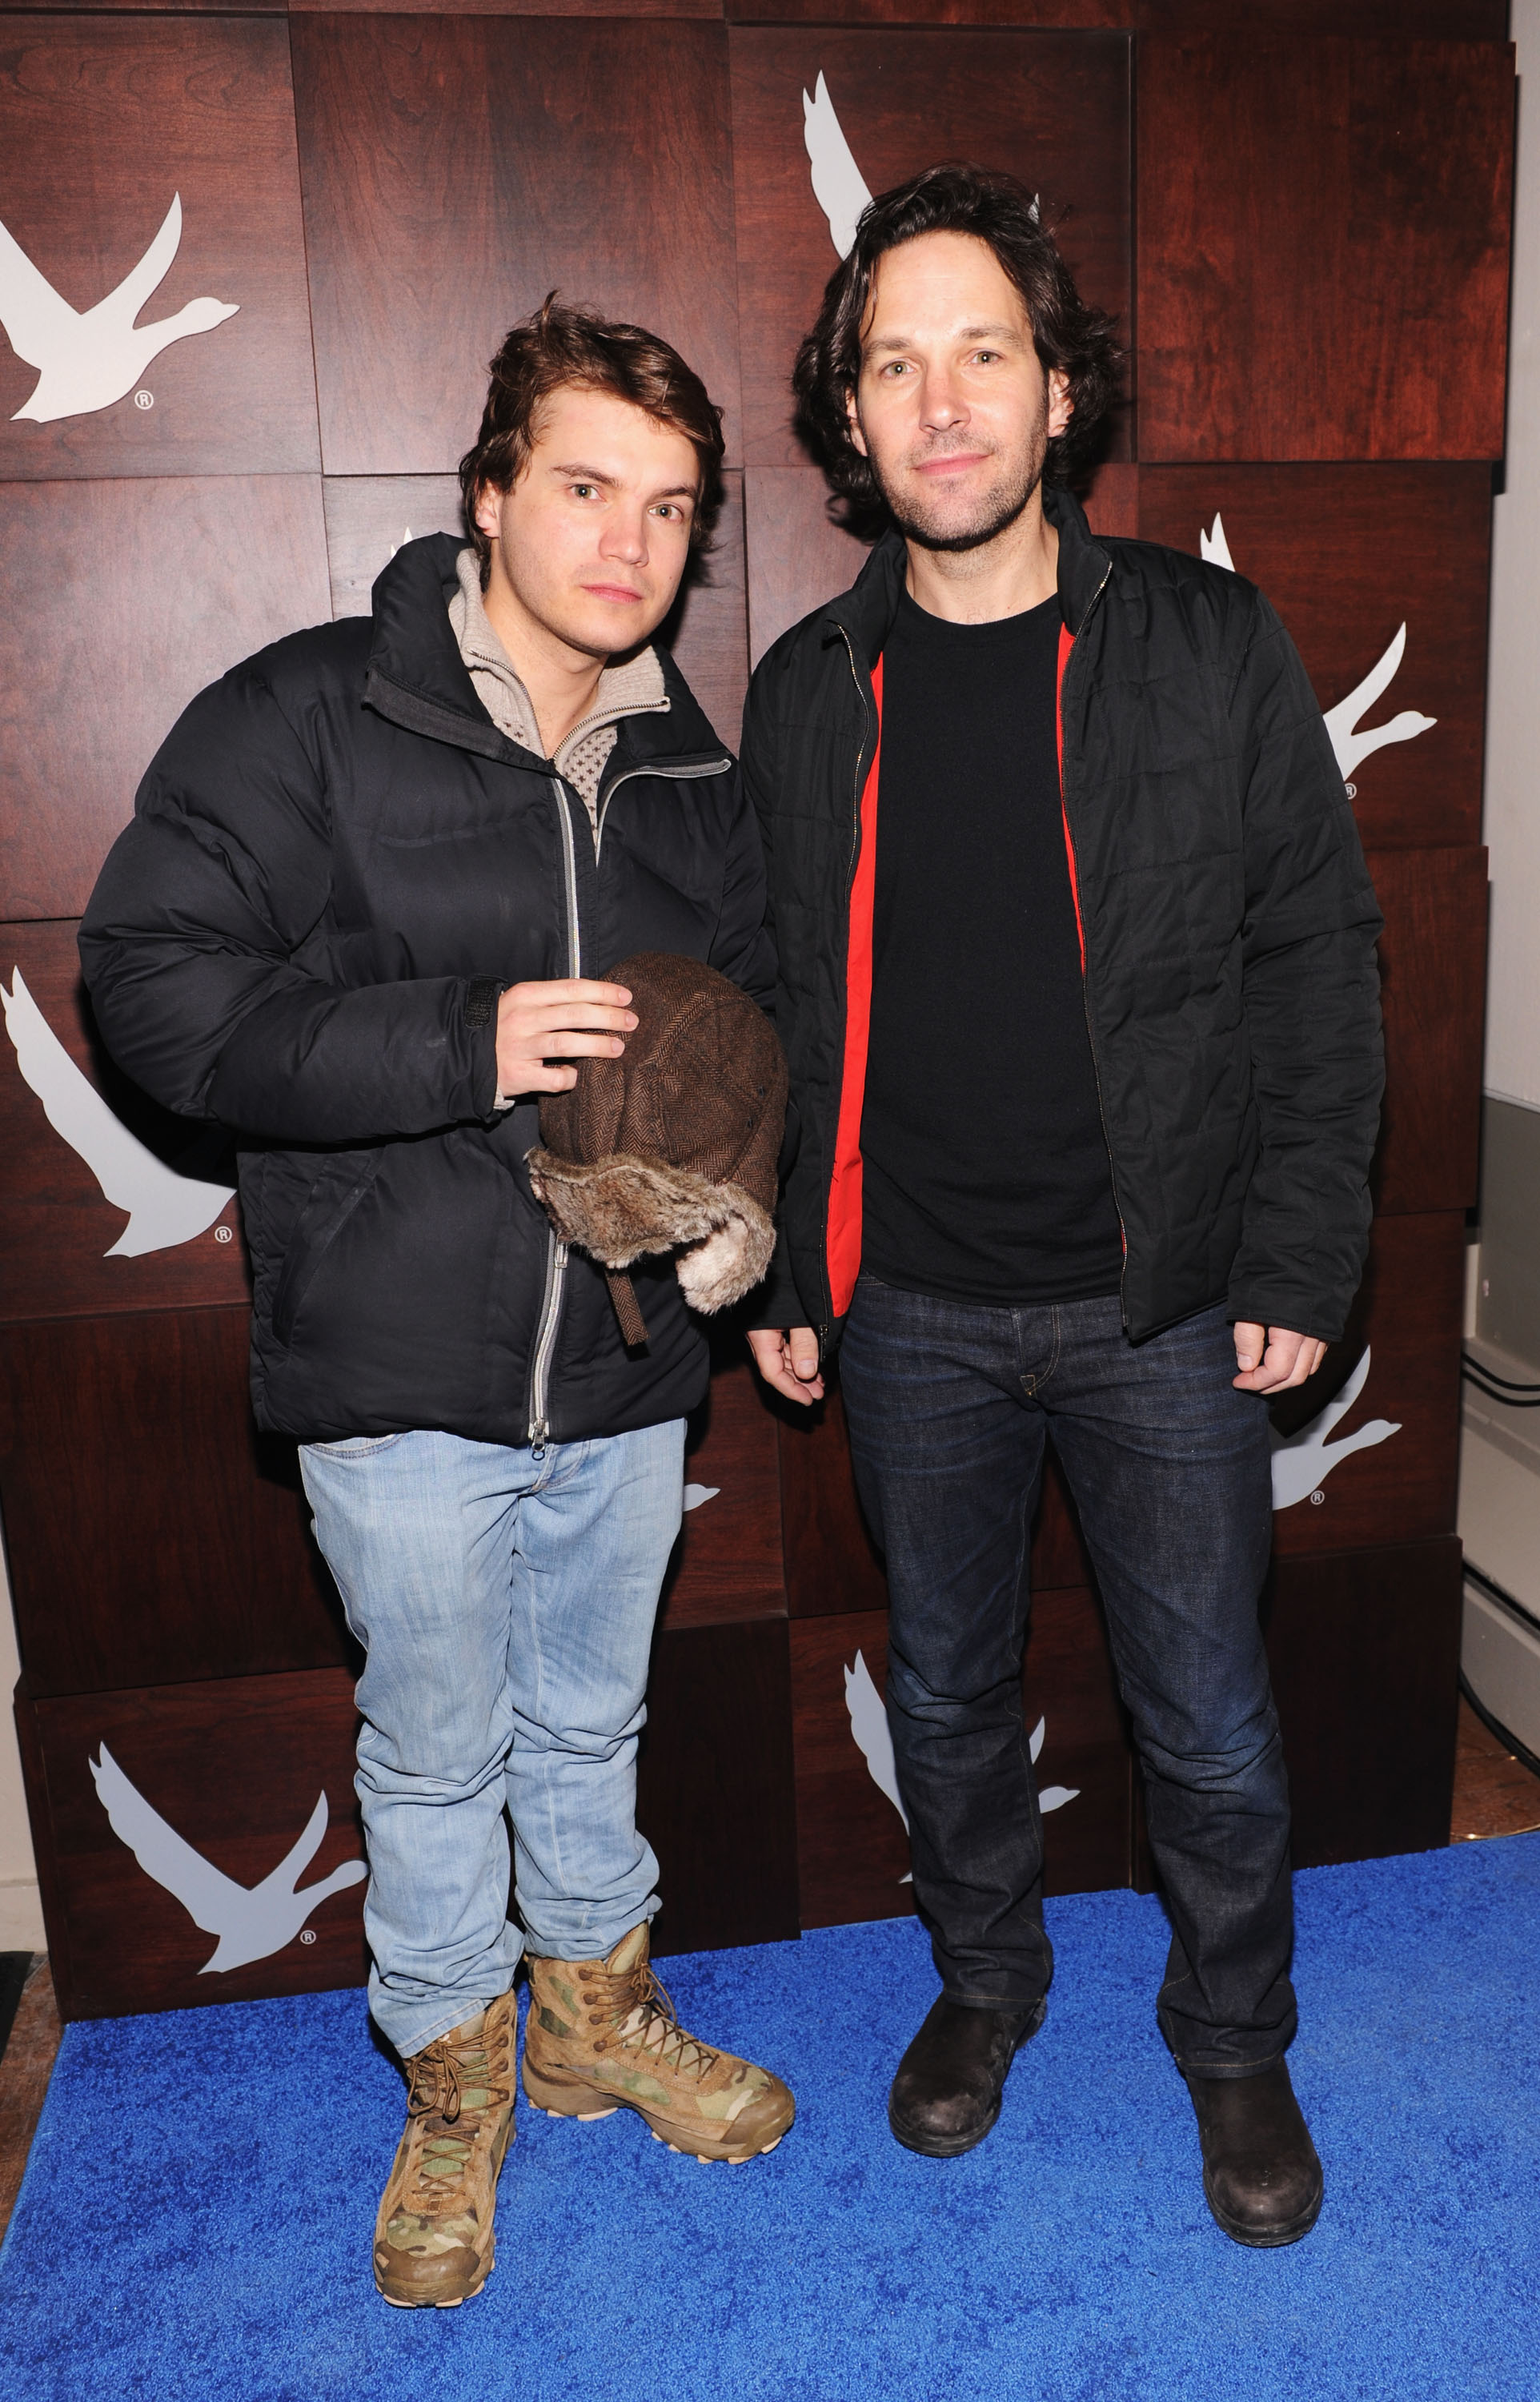 PARK CITY, UT - JANUARY 20:  Actor Emile Hirsch and  actor Paul Rudd attend Grey Goose Blue Door "Prince Avalanche" Cocktail Party on January 20, 2013 in Park City, Utah.  (Photo by Jamie McCarthy/Getty Images for Grey Goose)